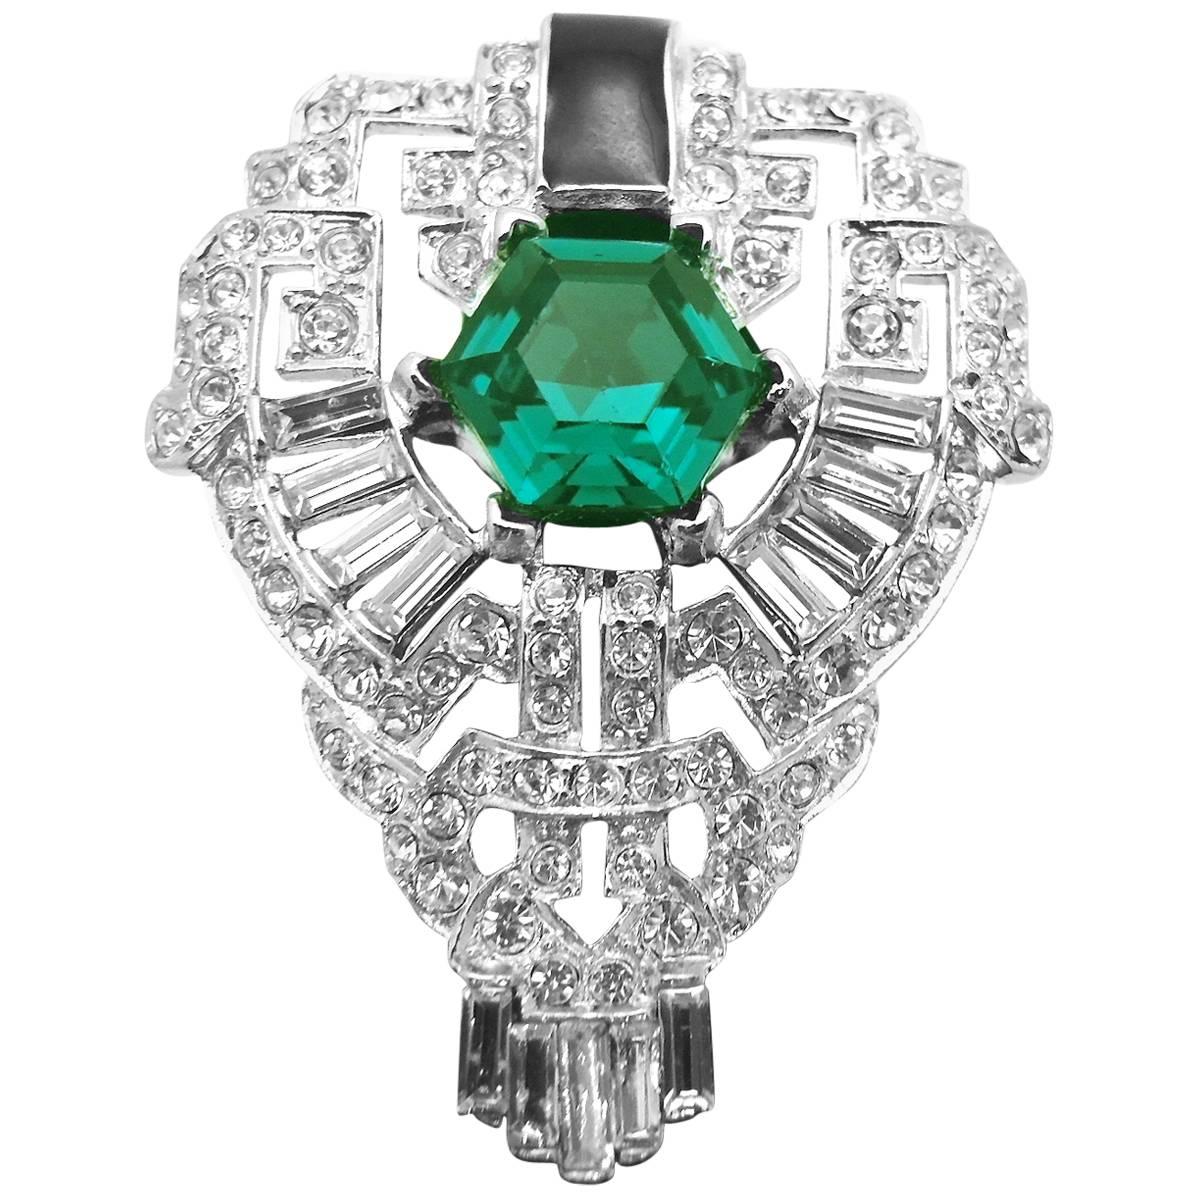 Kenneth Jay Lane Emerald Green & Clear Crystal Statement Ring